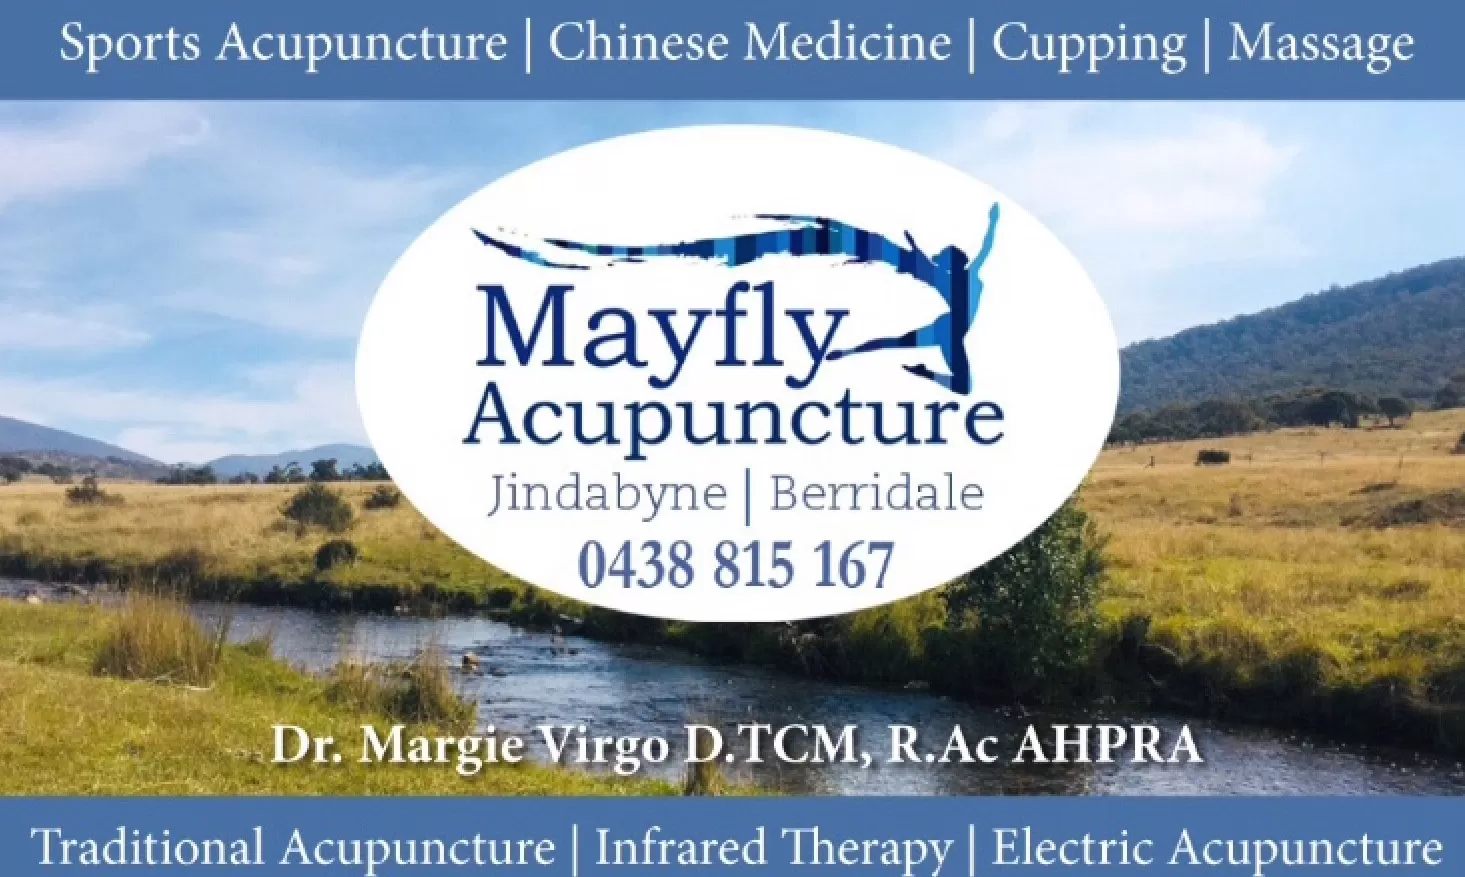 Acupuncture Jindabyne|Berridale|Cooma| Mayfly Acupuncture image